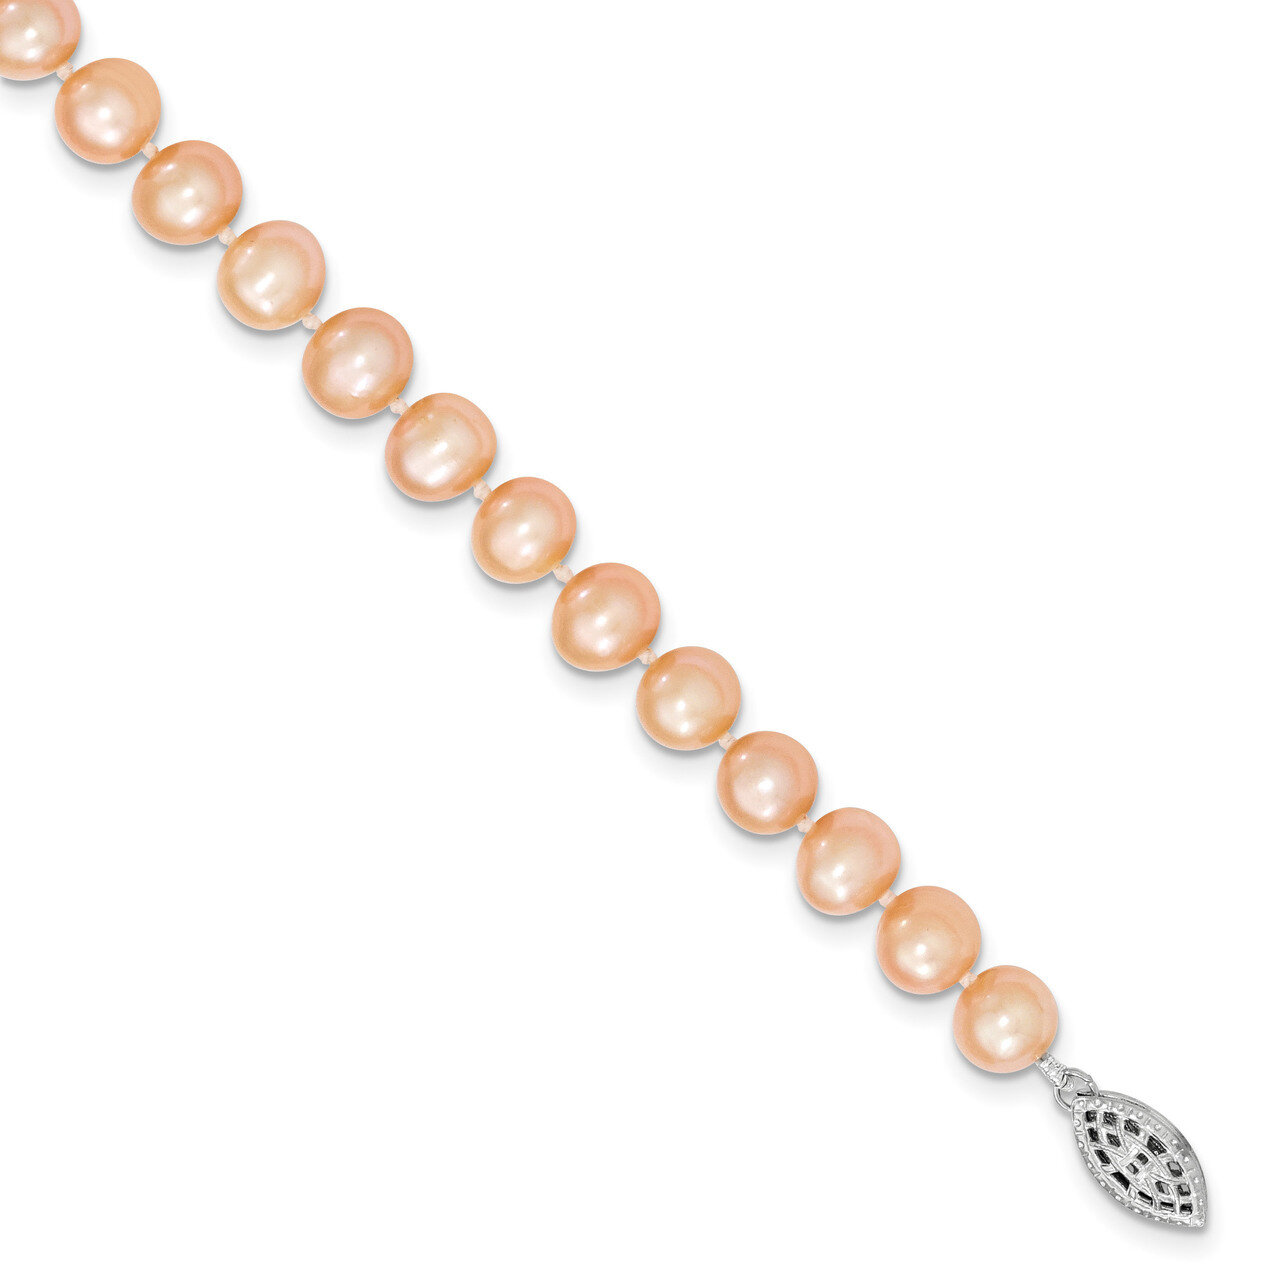 7-8mm Pink Cultured Freshwater Pearl Necklace 24 Inch Sterling Silver Rhodium-plated QH5167-24